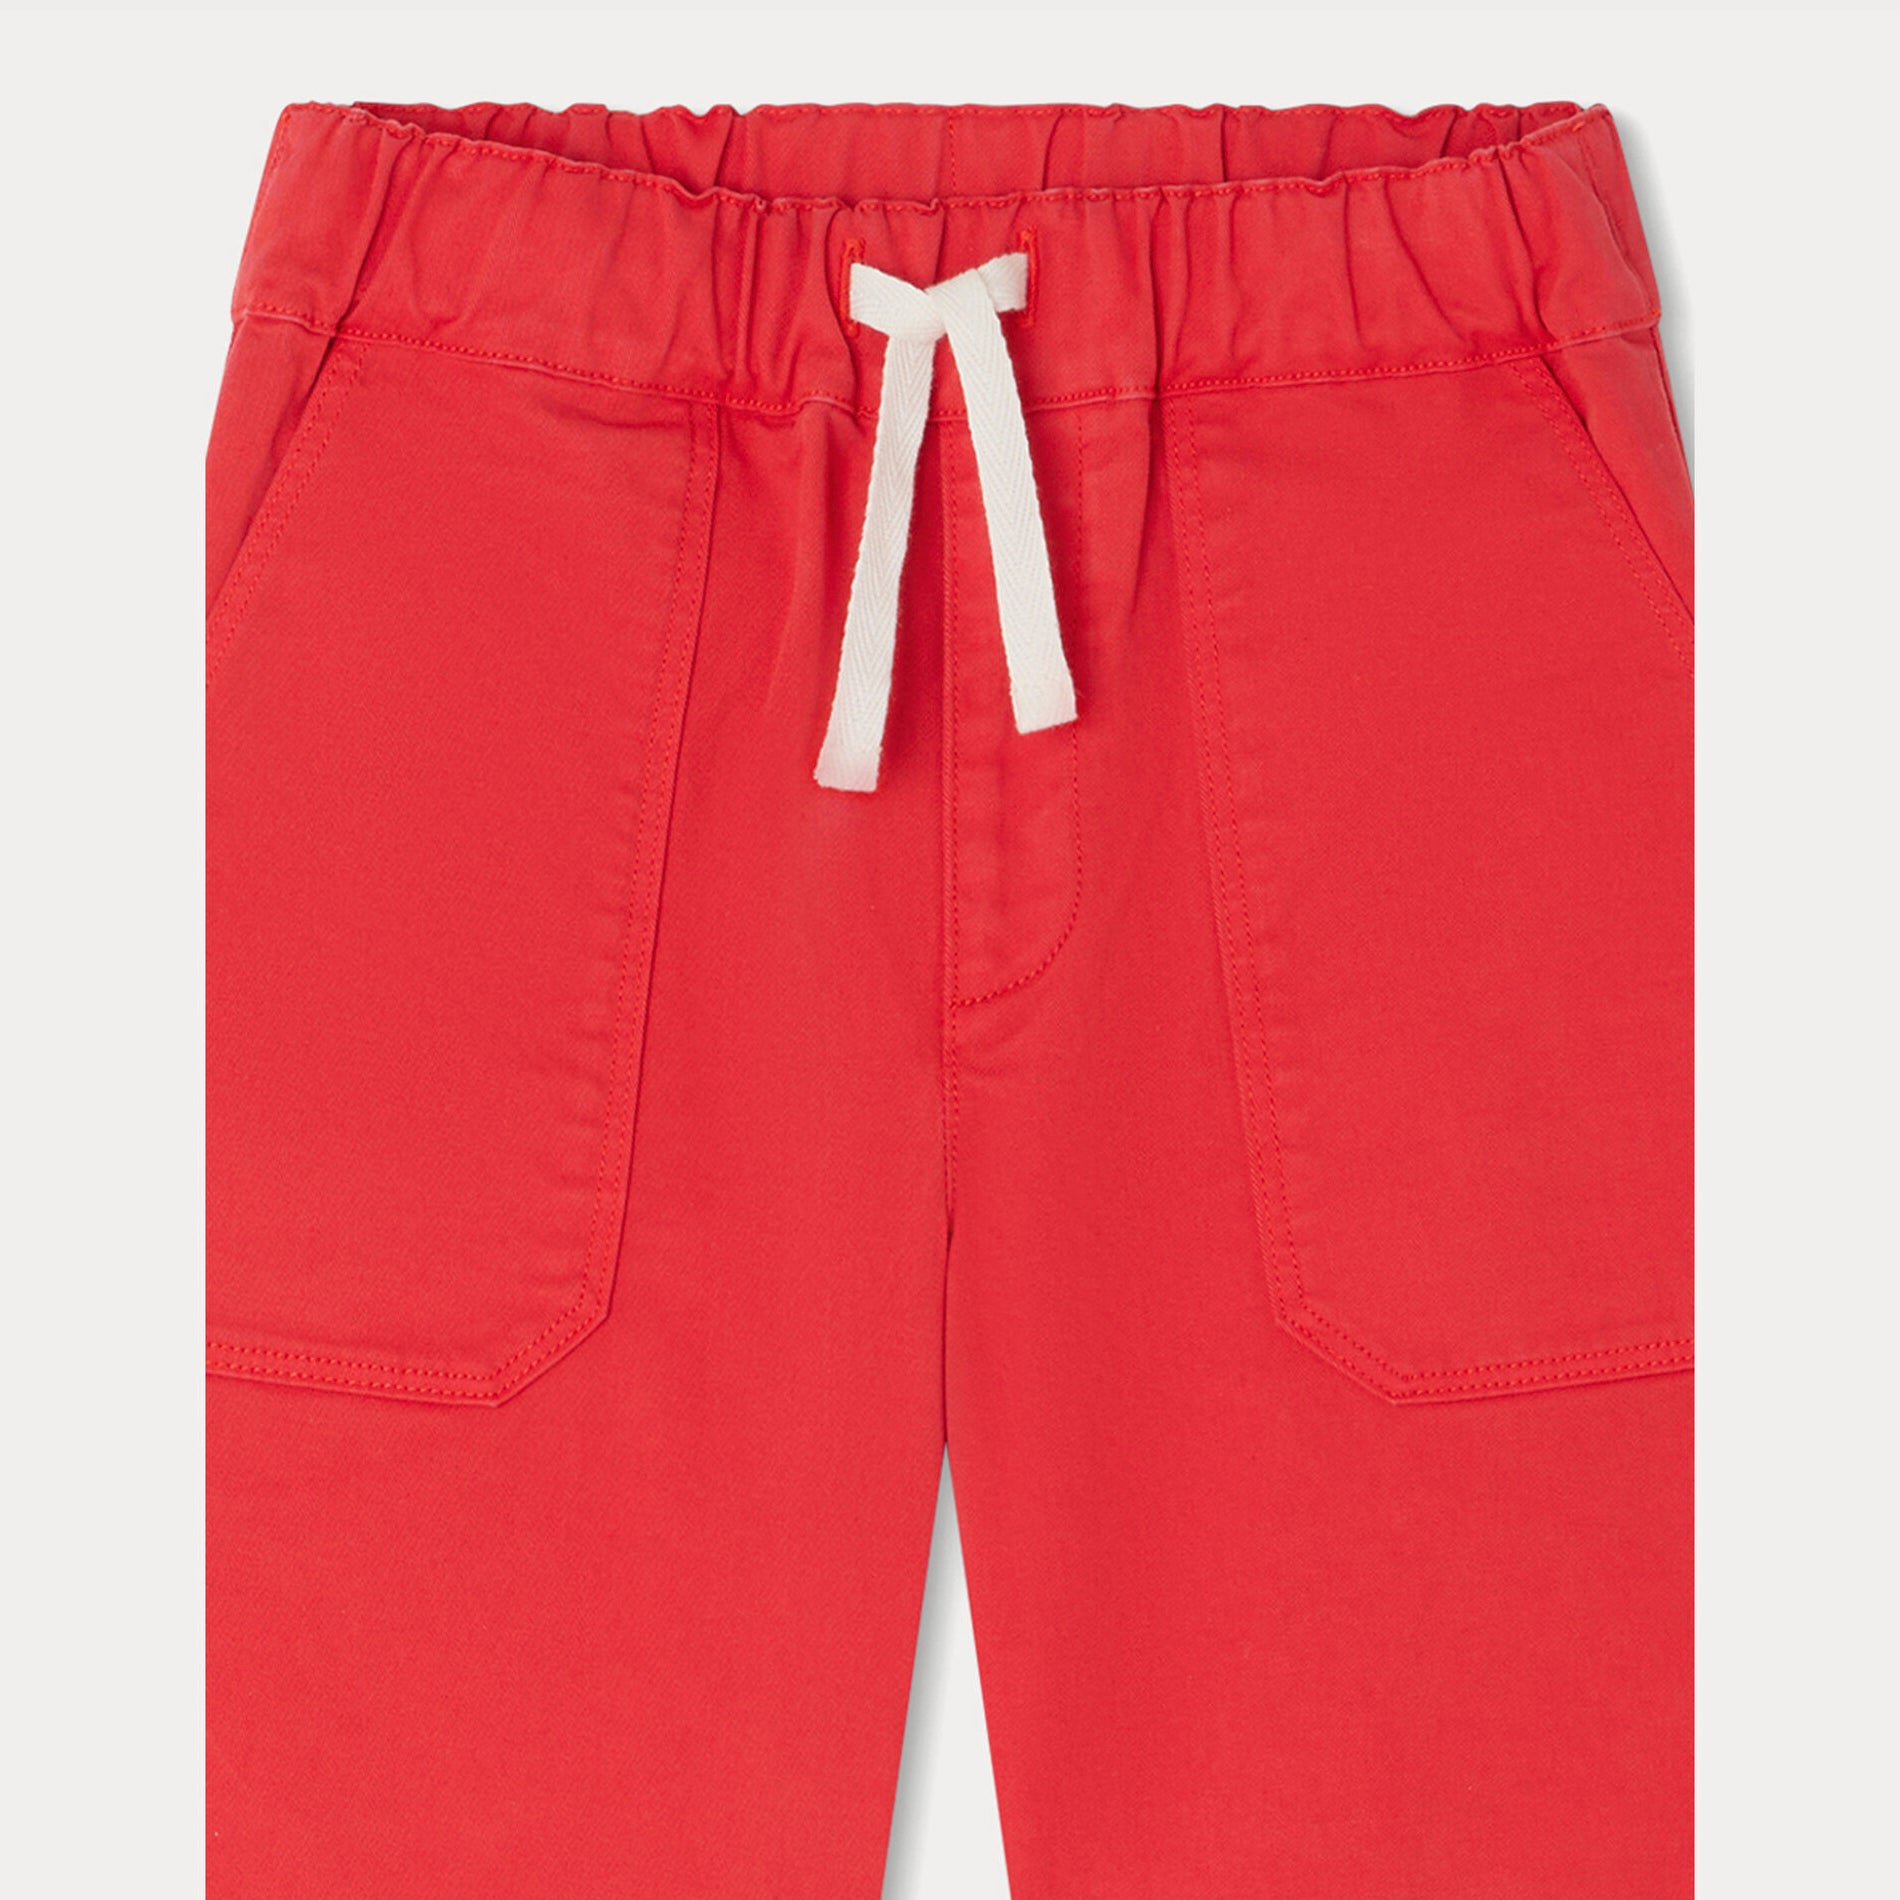 Boys Red Cotton Shorts